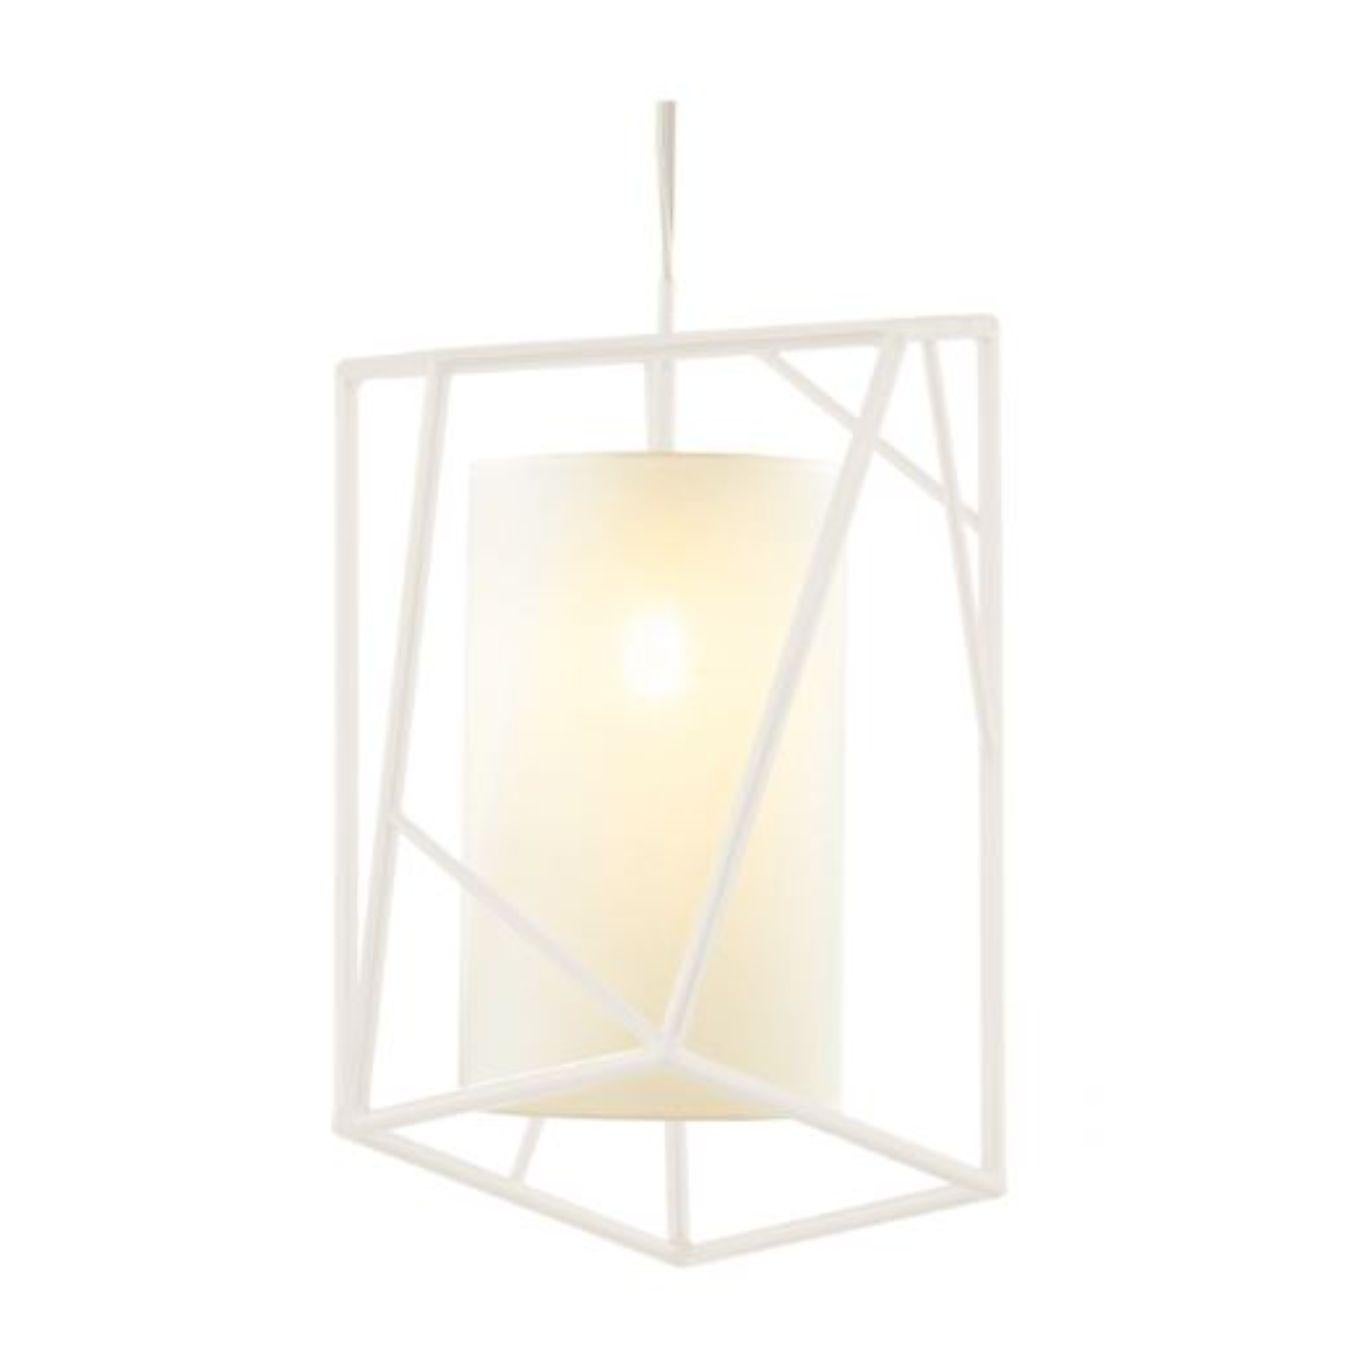 Ivory Star III Suspension lamp by Dooq
Dimensions: W 35 x D 35 x H 53 cm
Materials: lacquered metal, polished or satin metal.
Abat-jour: linen
Also available in different colors and materials.

Information:
230V/50Hz
E27/1x15W